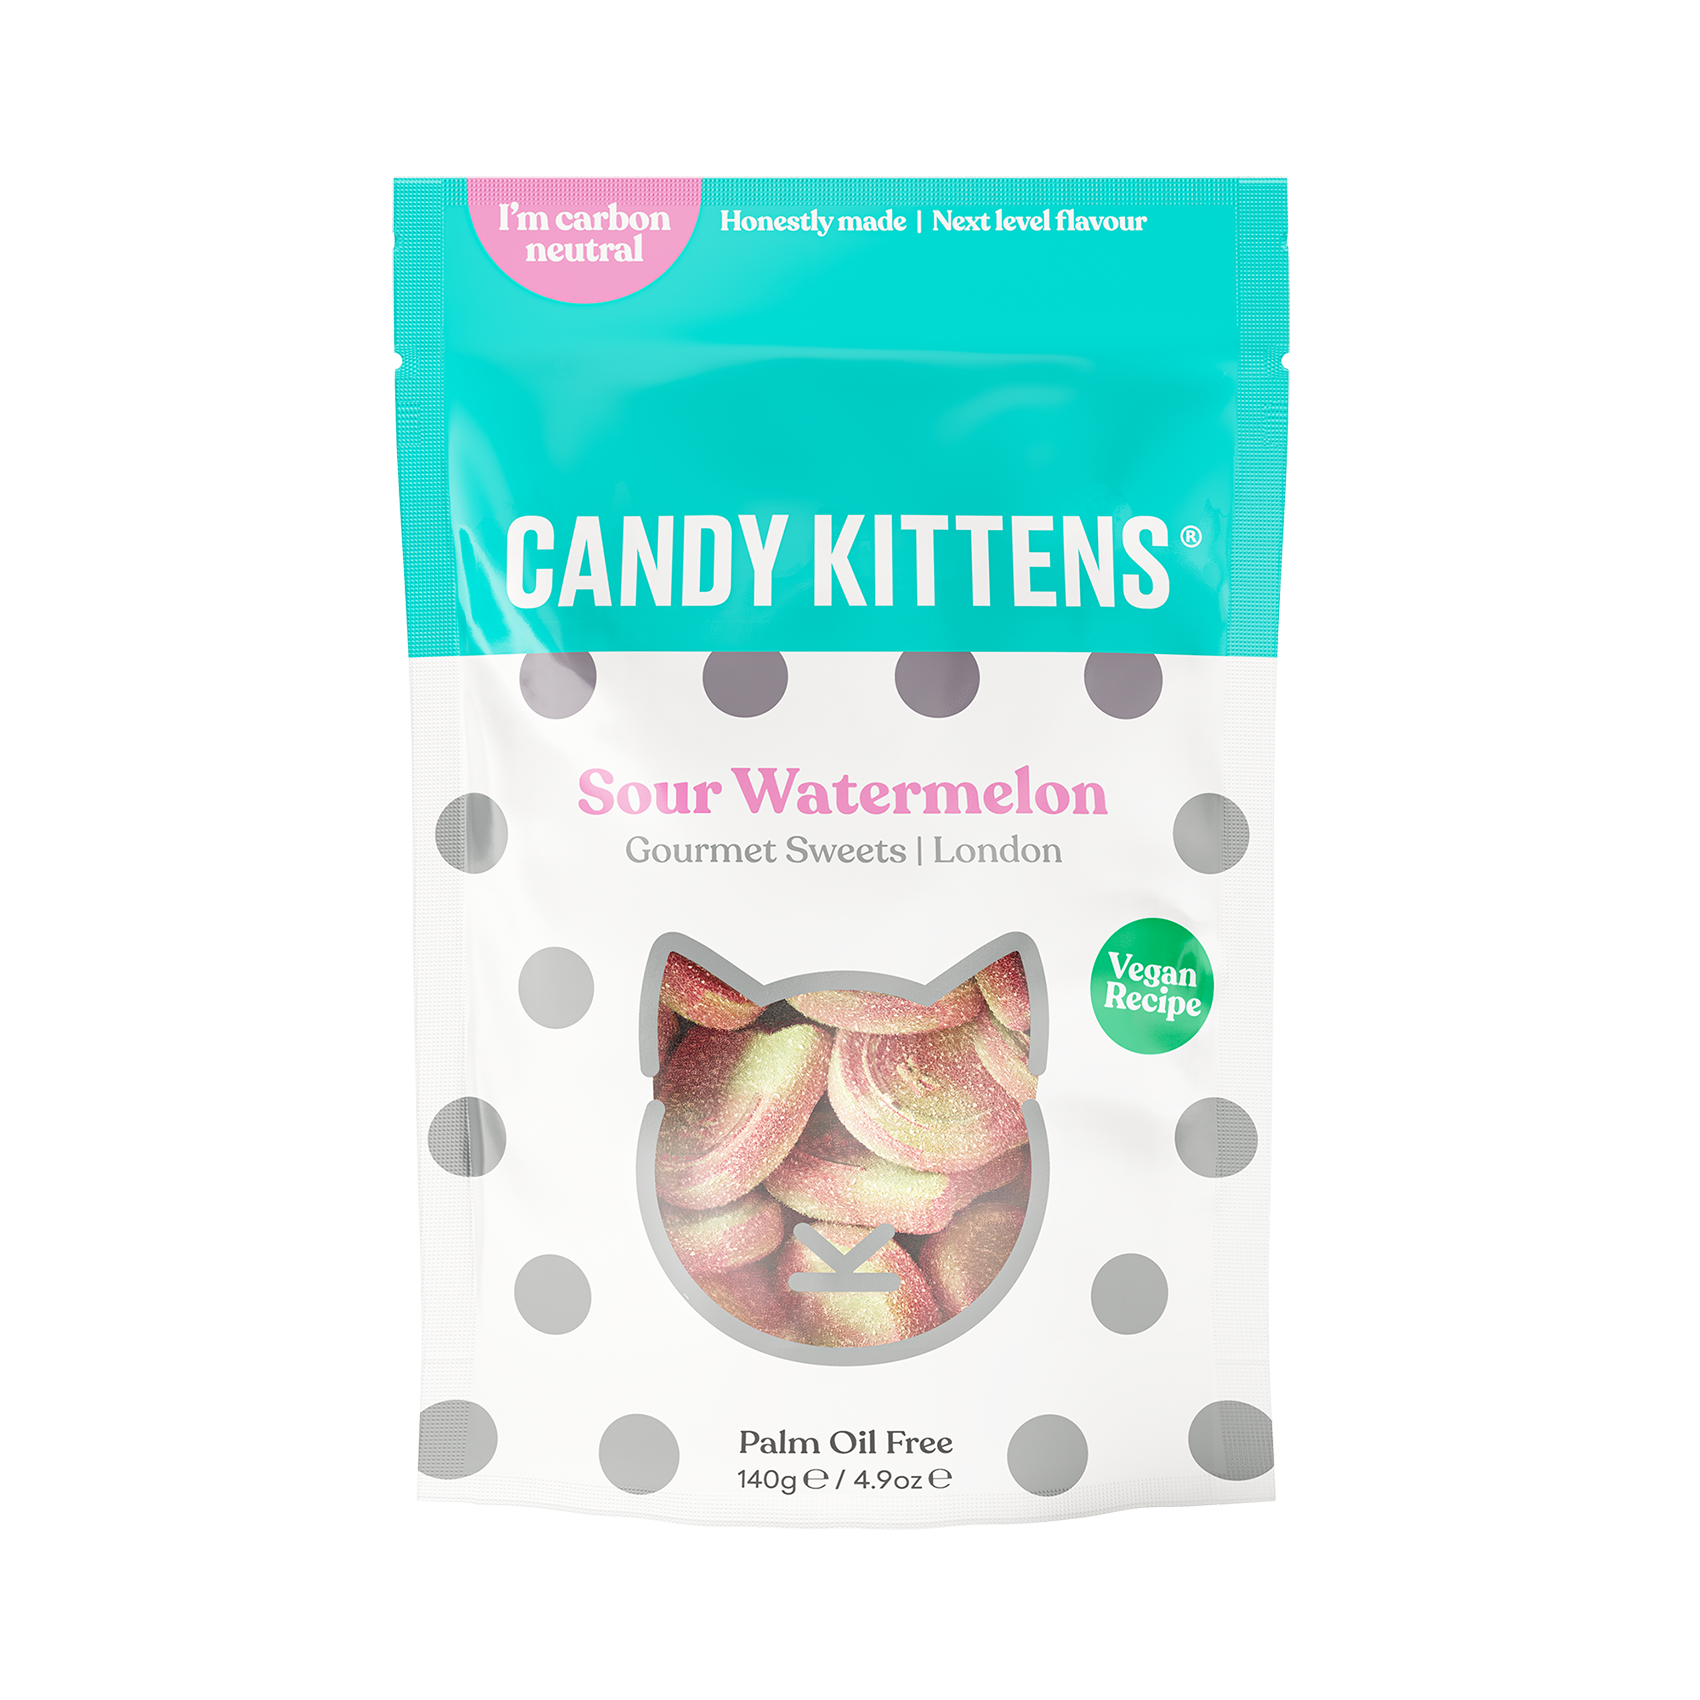 Candy Kittens Gourmet Sweets Sharing Bag Sour Watermelon 145g RRP 3 CLEARANCE XL 1.99 or 2 for 3